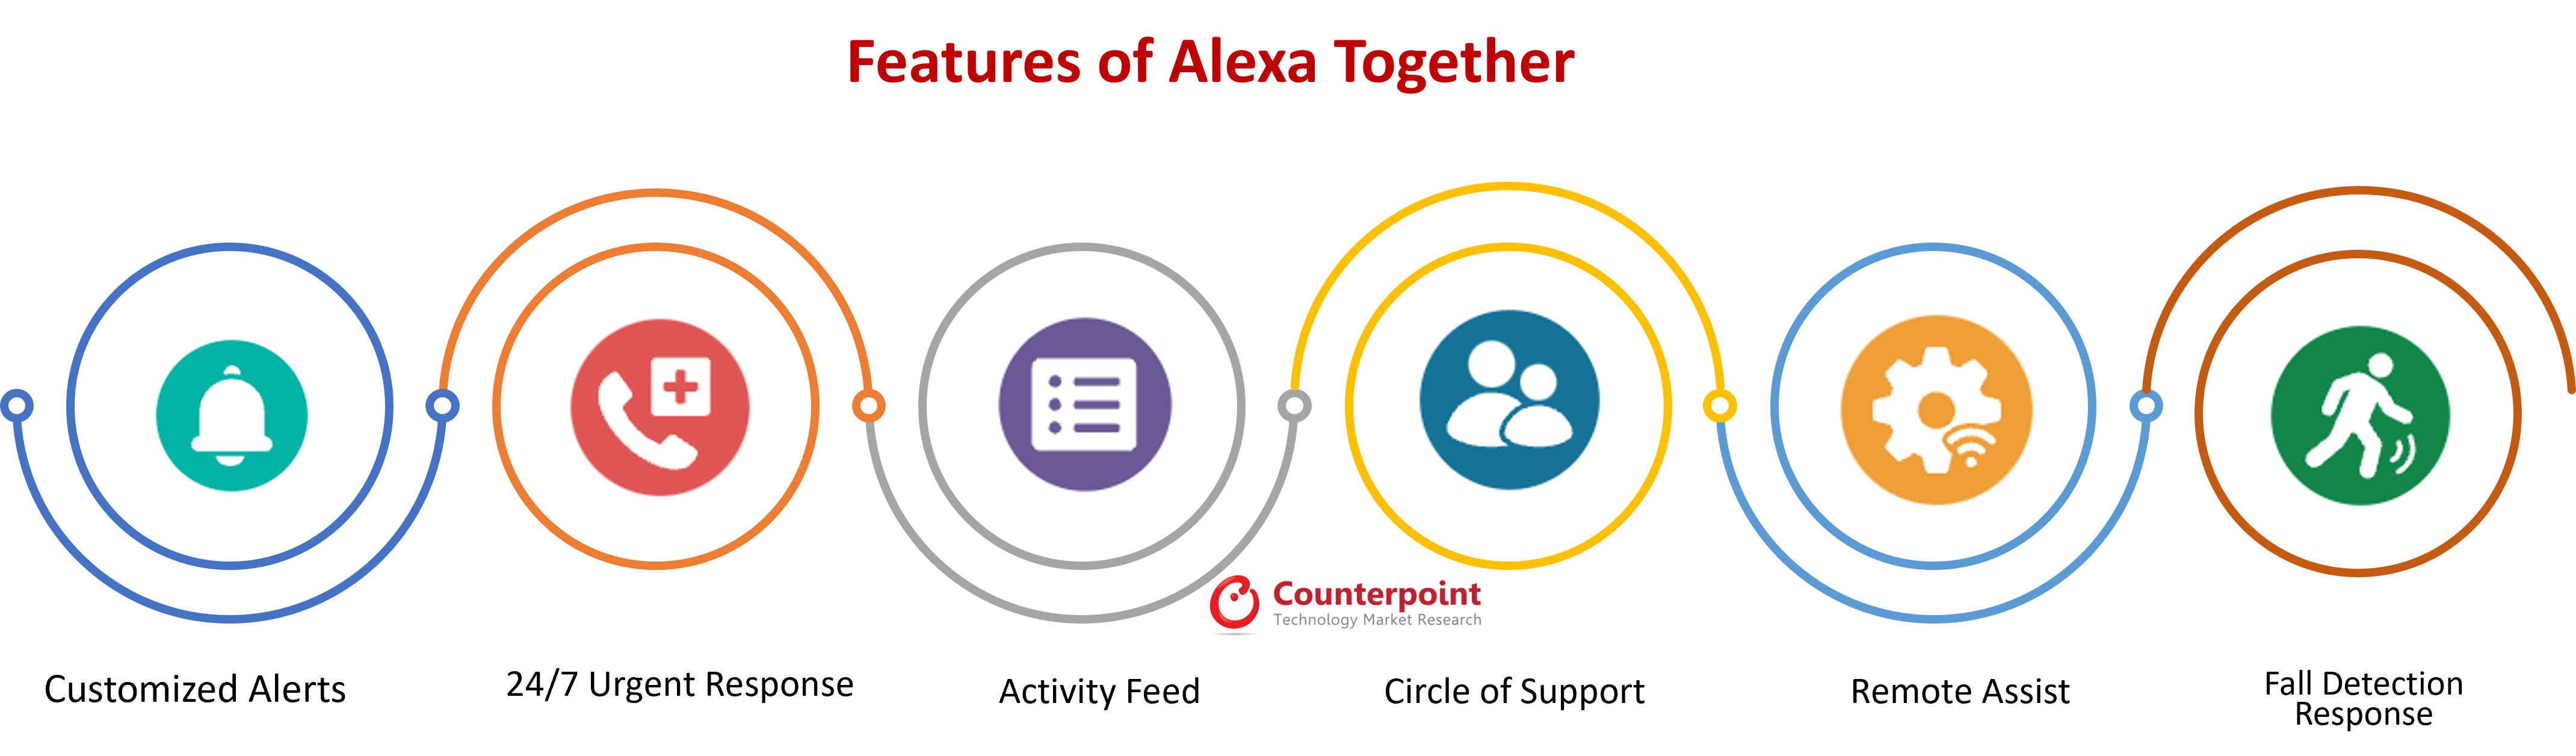 counterpoint功能Alexa Together